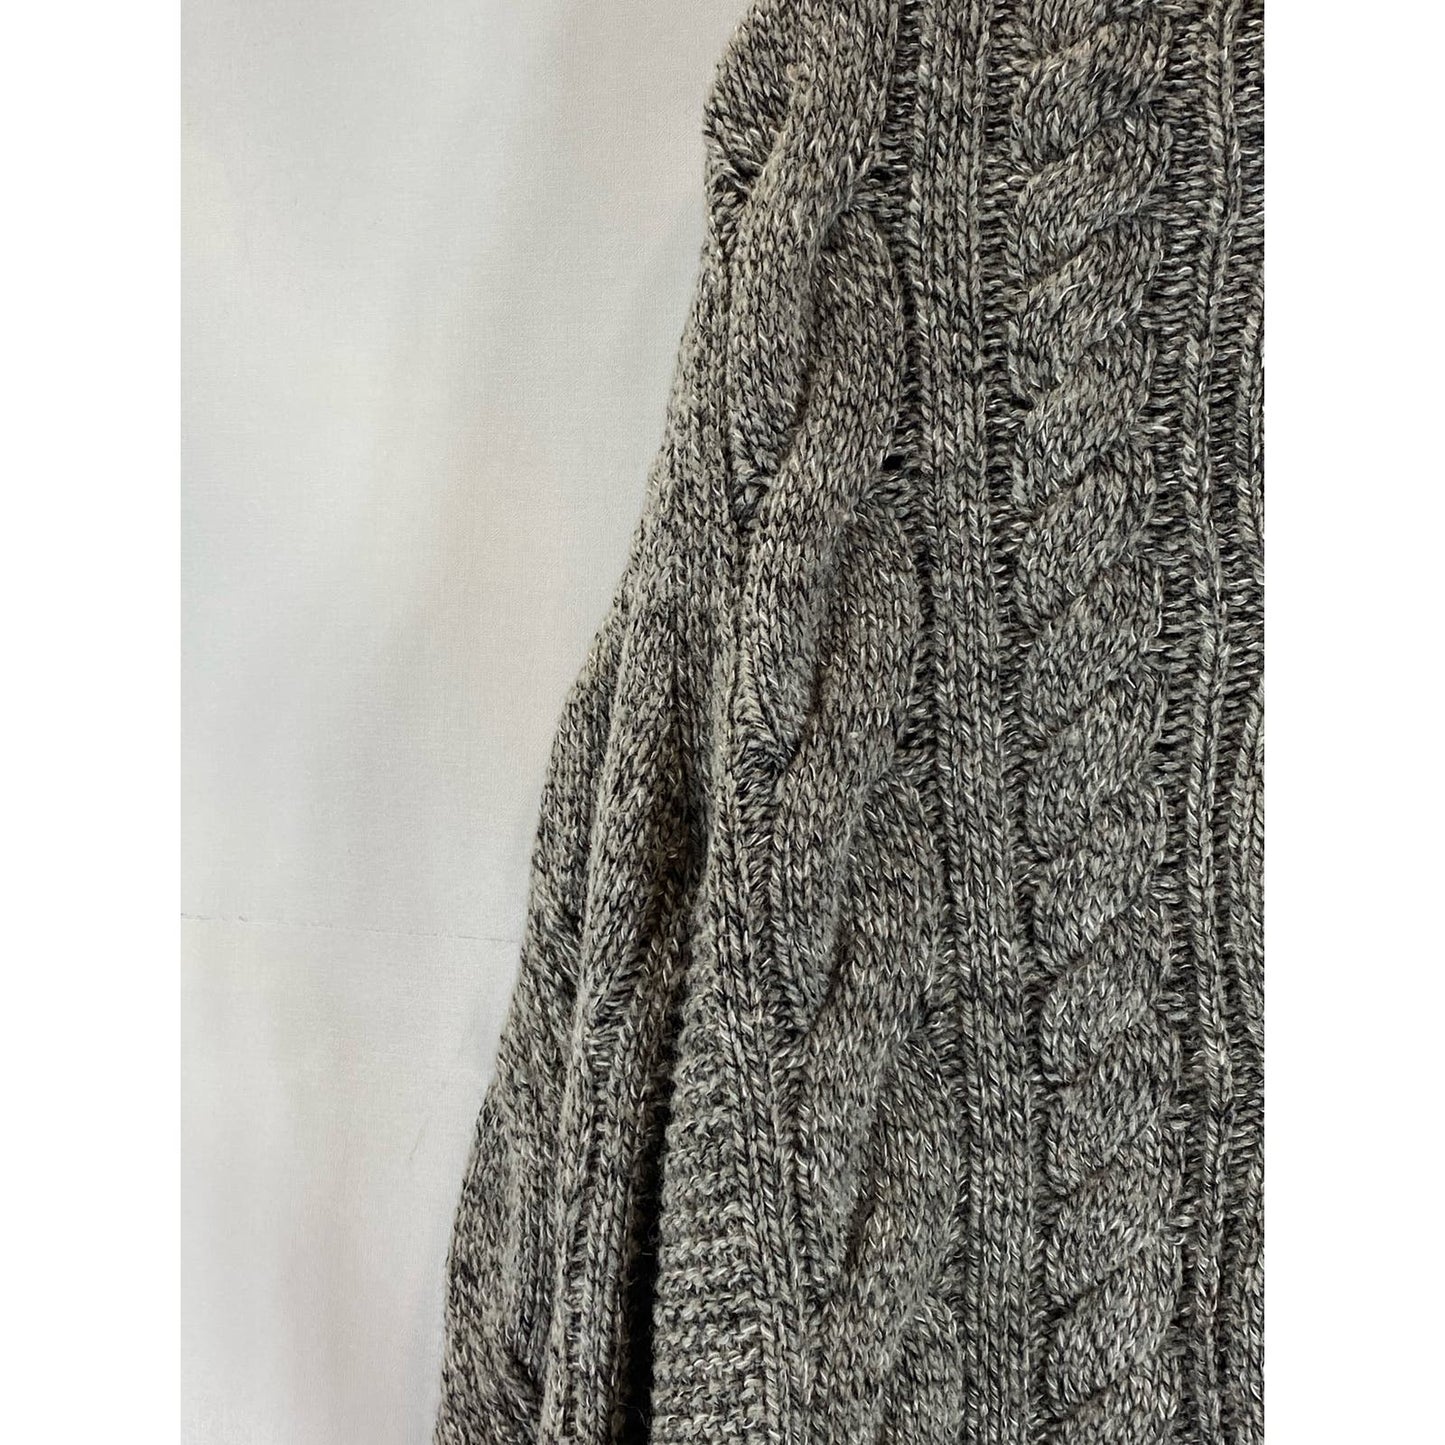 BANANA REPUBLIC Men's Gray Mock-Neck Cable Grown Knit Pullover Sweater SZ M